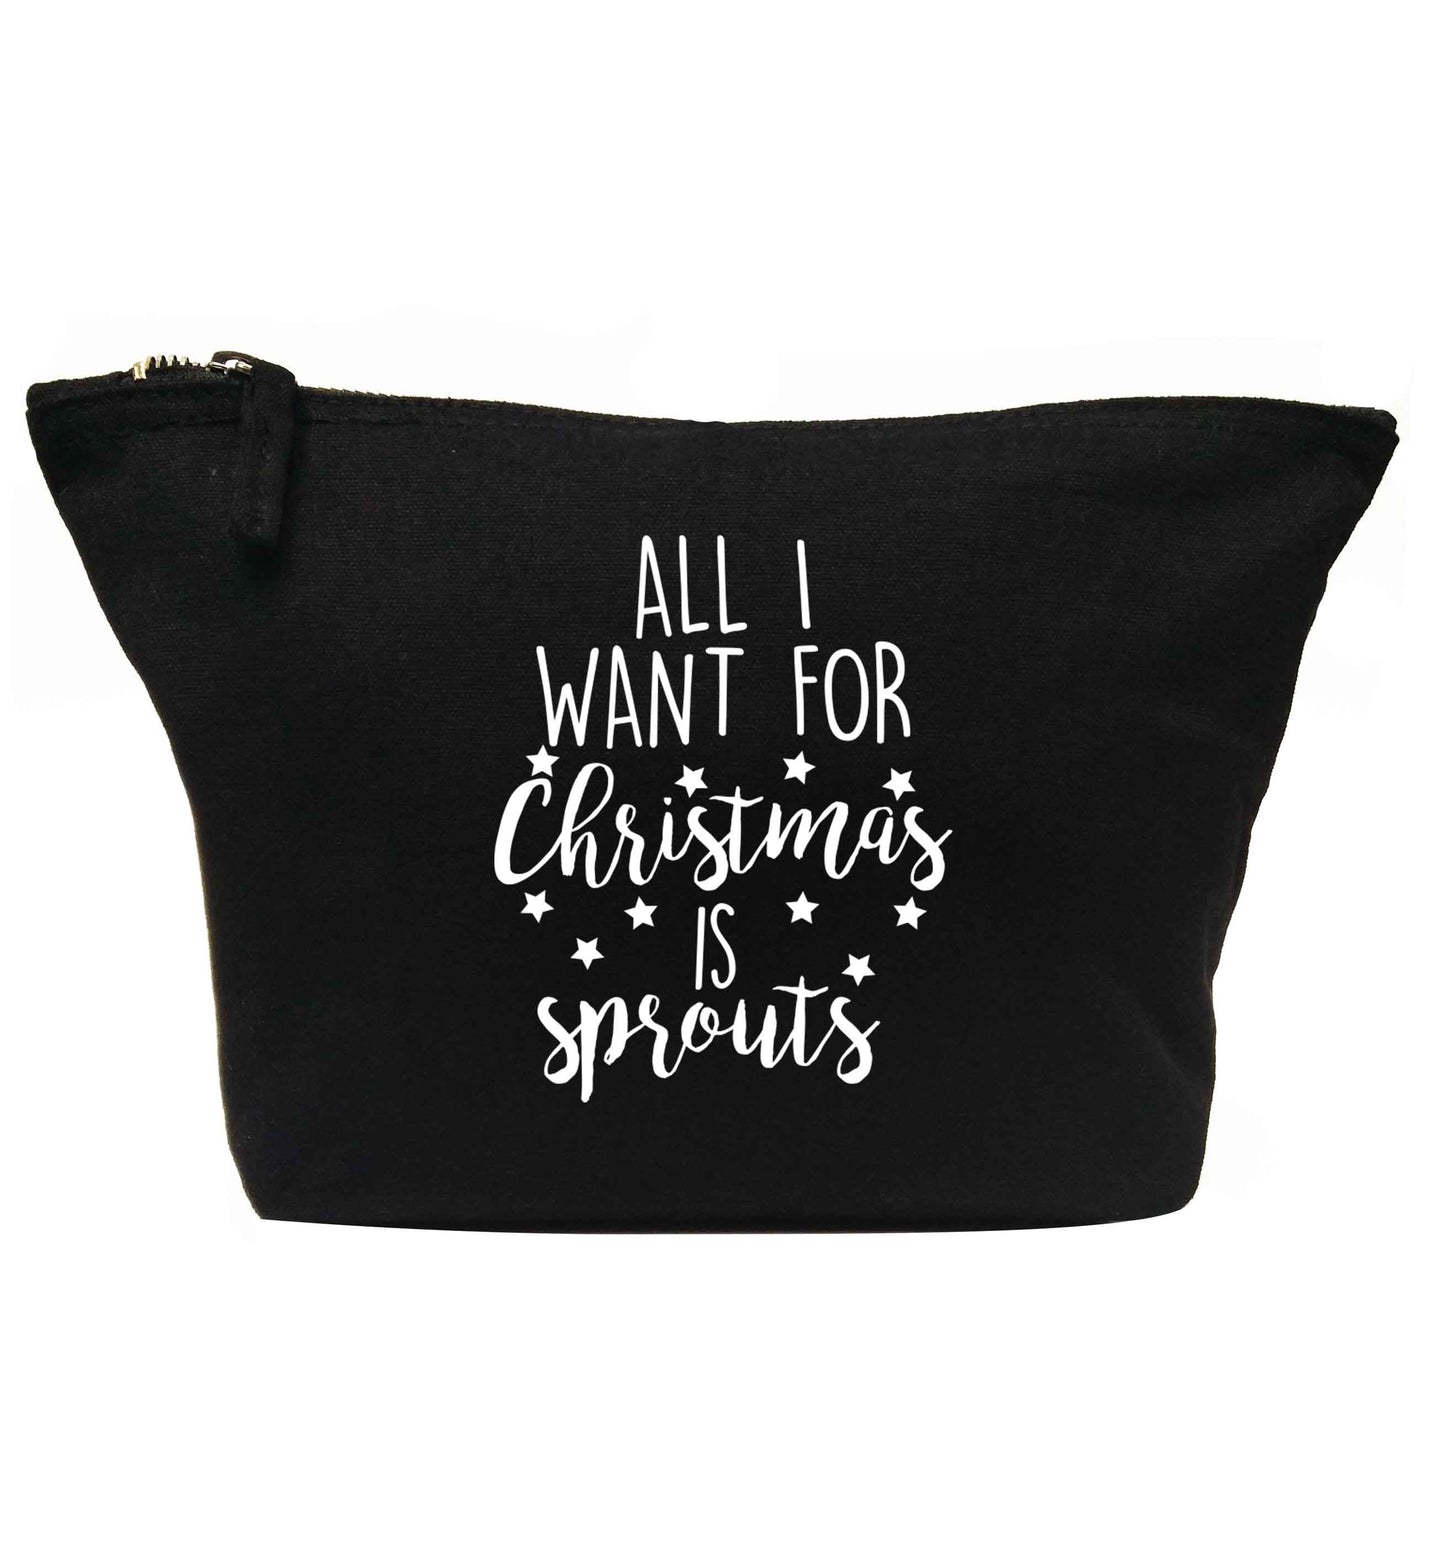 All I want for Christmas is sprouts | Makeup / wash bag